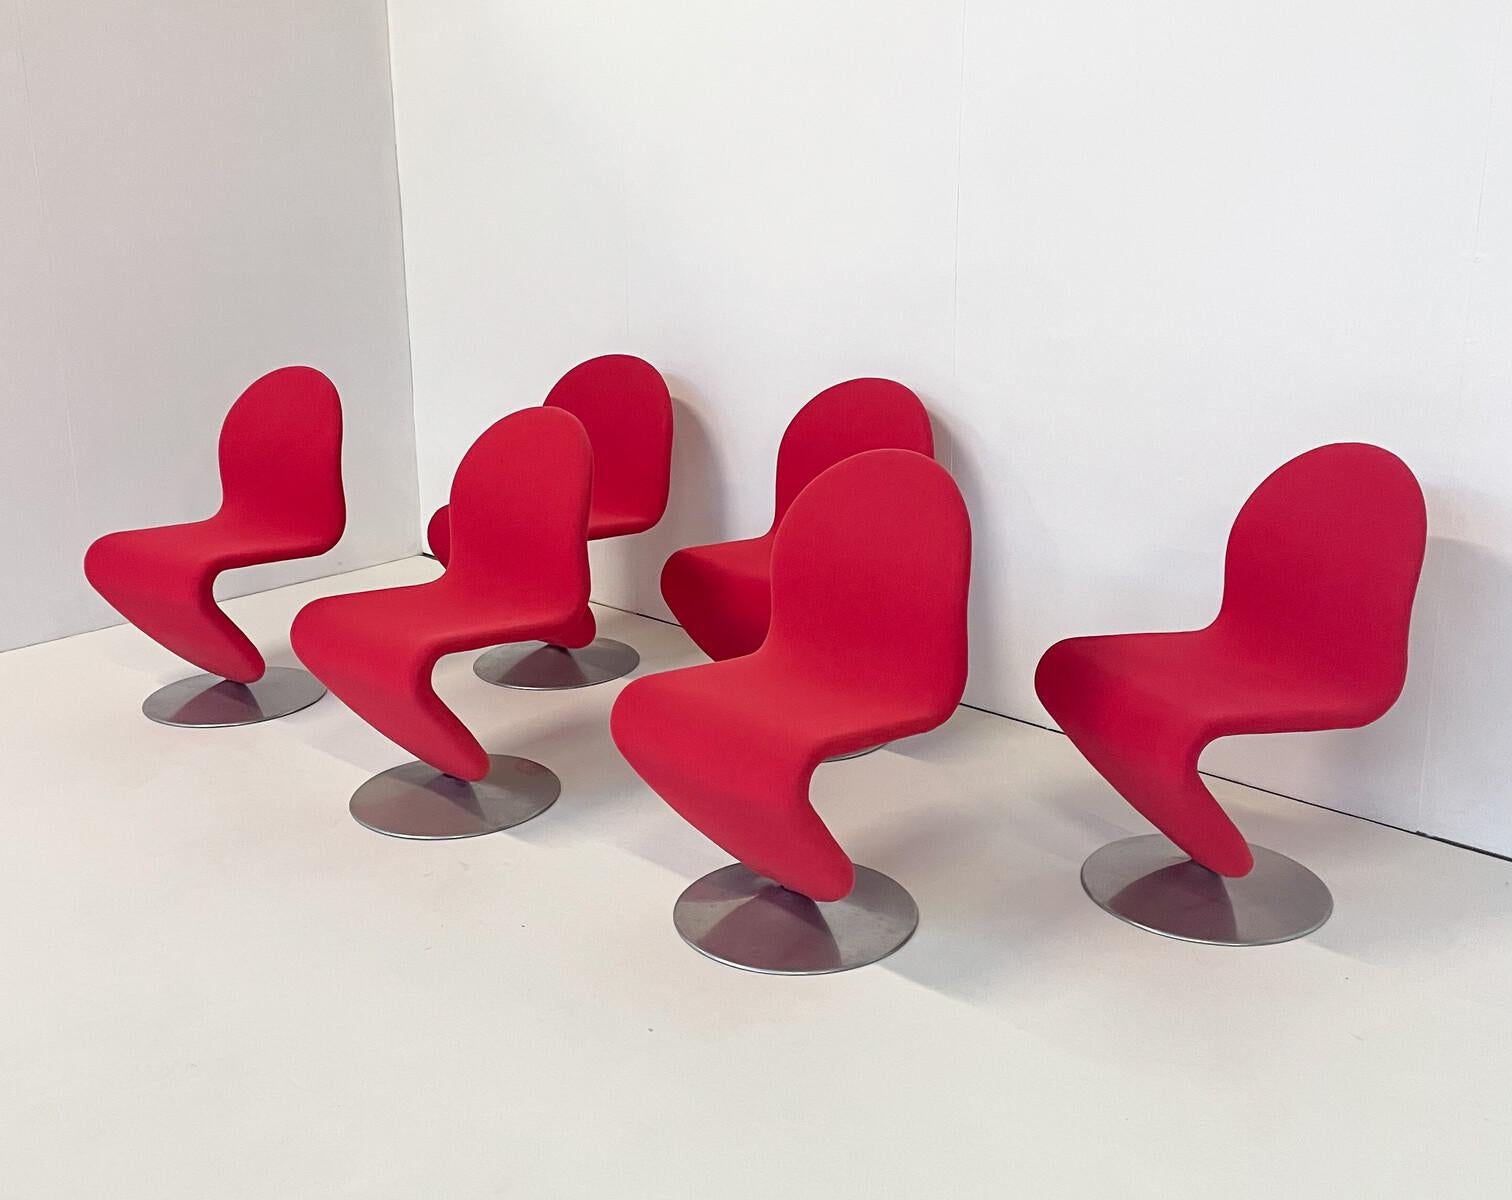 Late 20th Century Mid-Century Modern Set of 6 Red System 123 Chairs by Verner Panton, 1973 For Sale